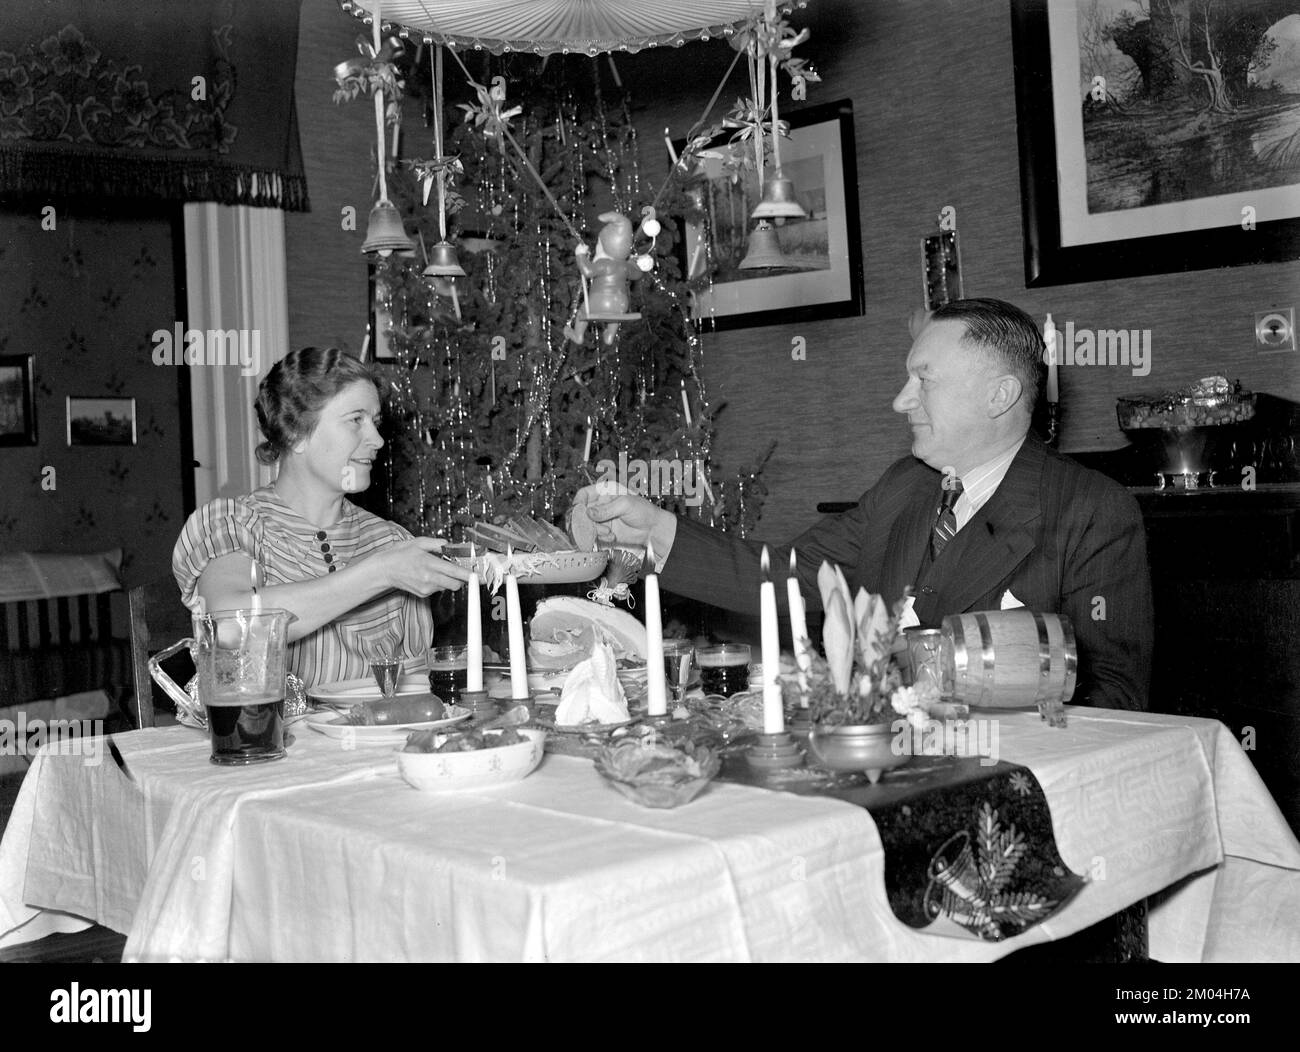 At christmas in the 1940s. A couple is seen having their christmas dinner at a table in a christmas decorated room including a christmas tree. Sweden december 1940 Kristoffersson 42-11 Stock Photo